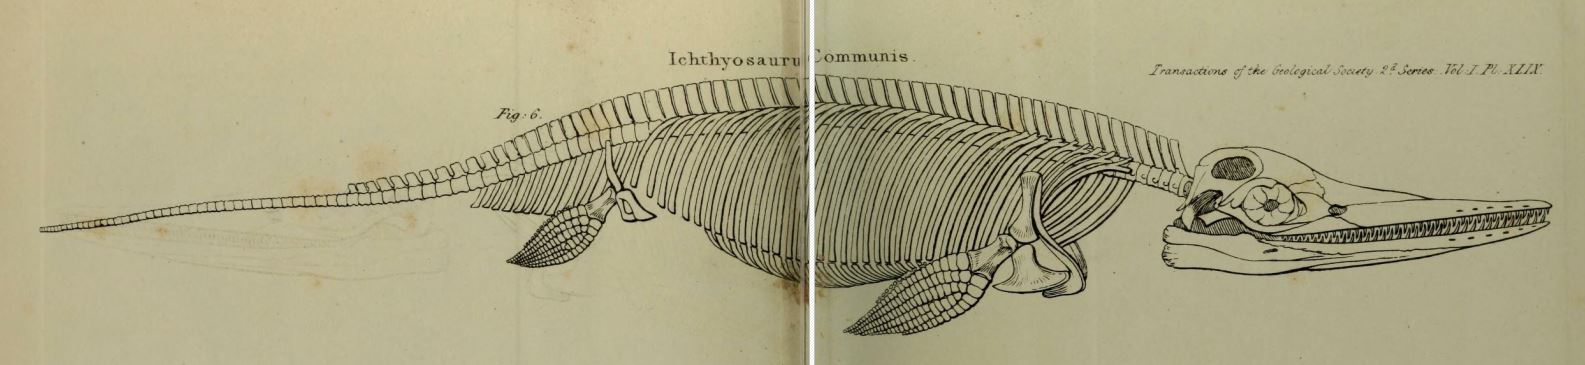 Ichthyosaur skeleton discovered by Mary Anning in 1821, illustration from an article of Willian D. Conybeare, published in 1824